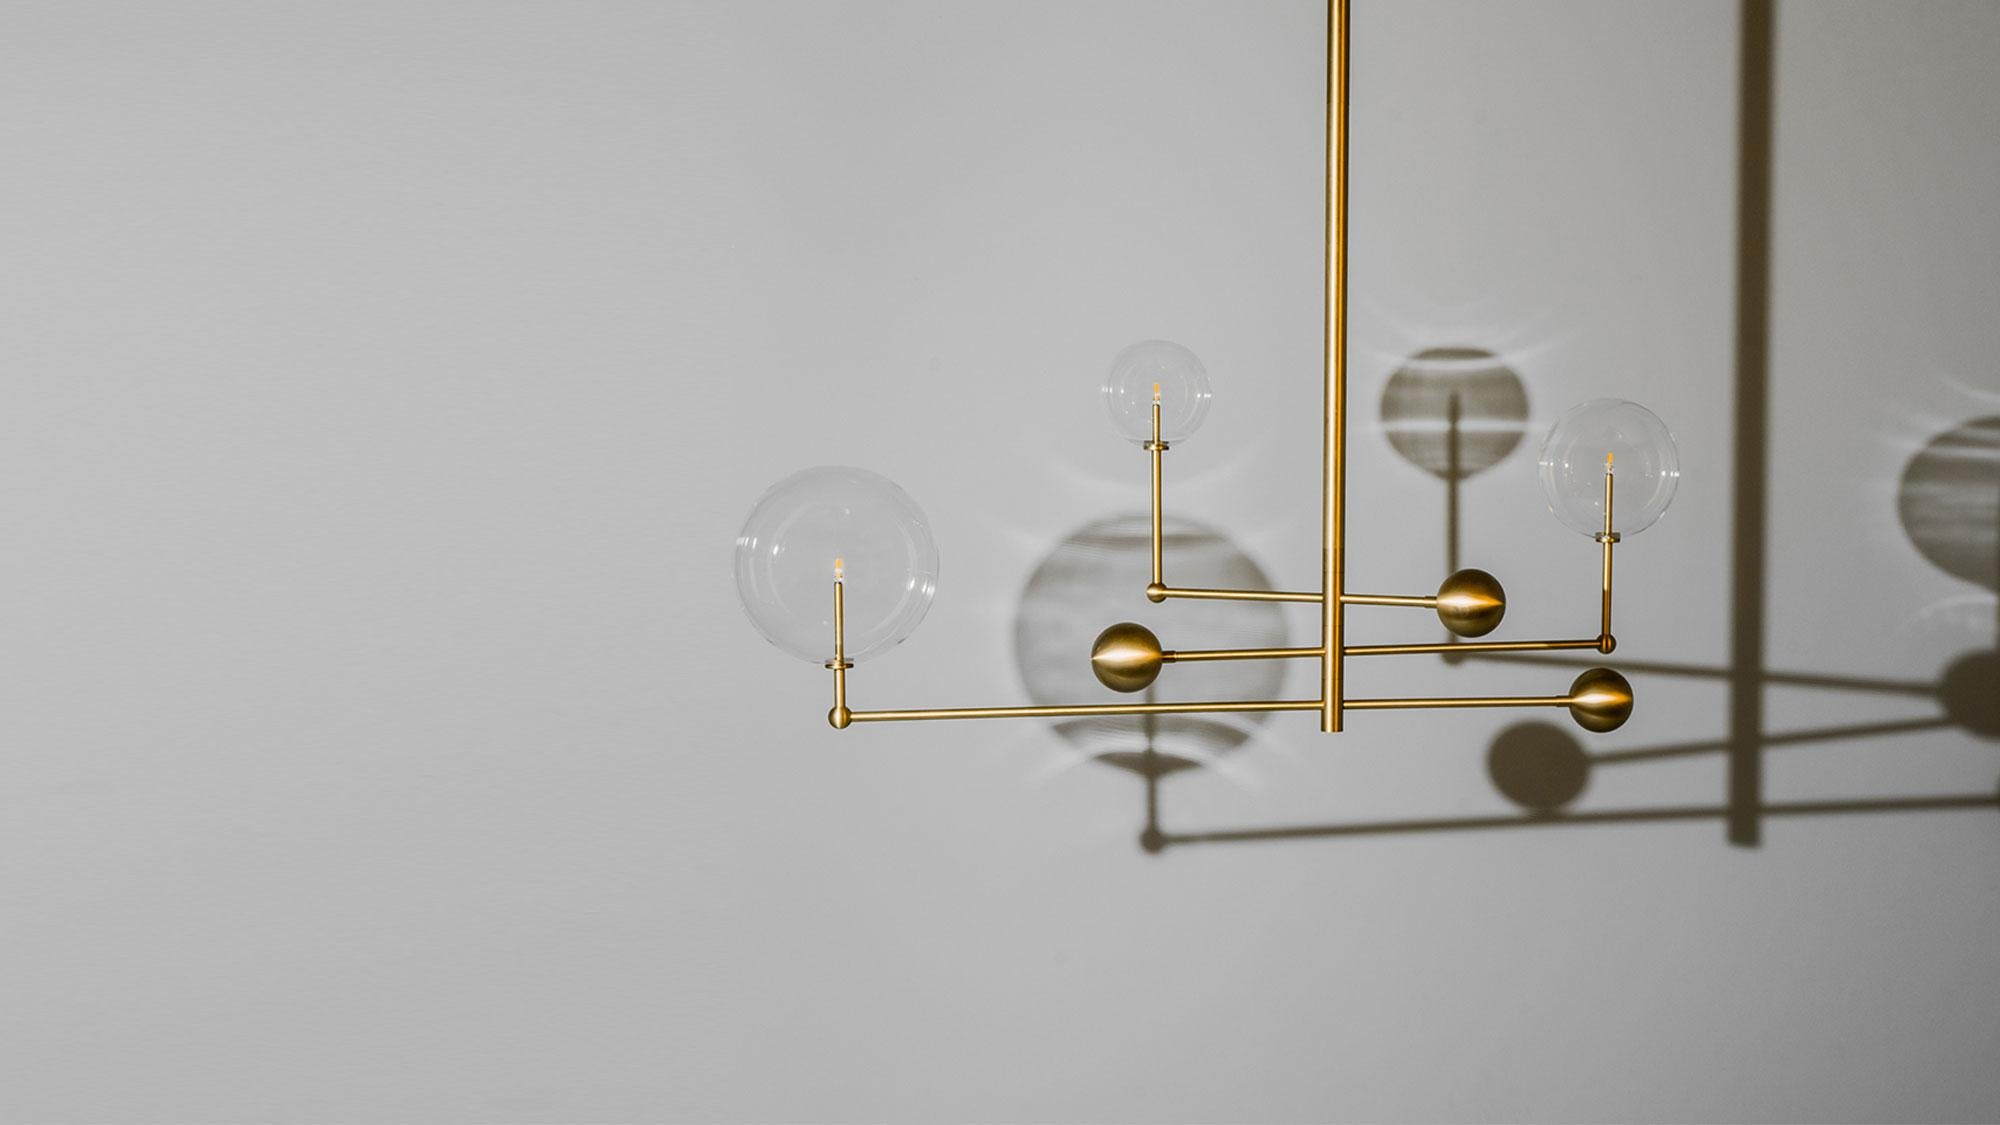 Three illuminated glass globes orbit a central gravitational axis. Rotating brass arms evoke the mechanical grace of the astronomical orrery. A celestial piece where precision meets elegance.

Available in our three signature finishes: Lacquered